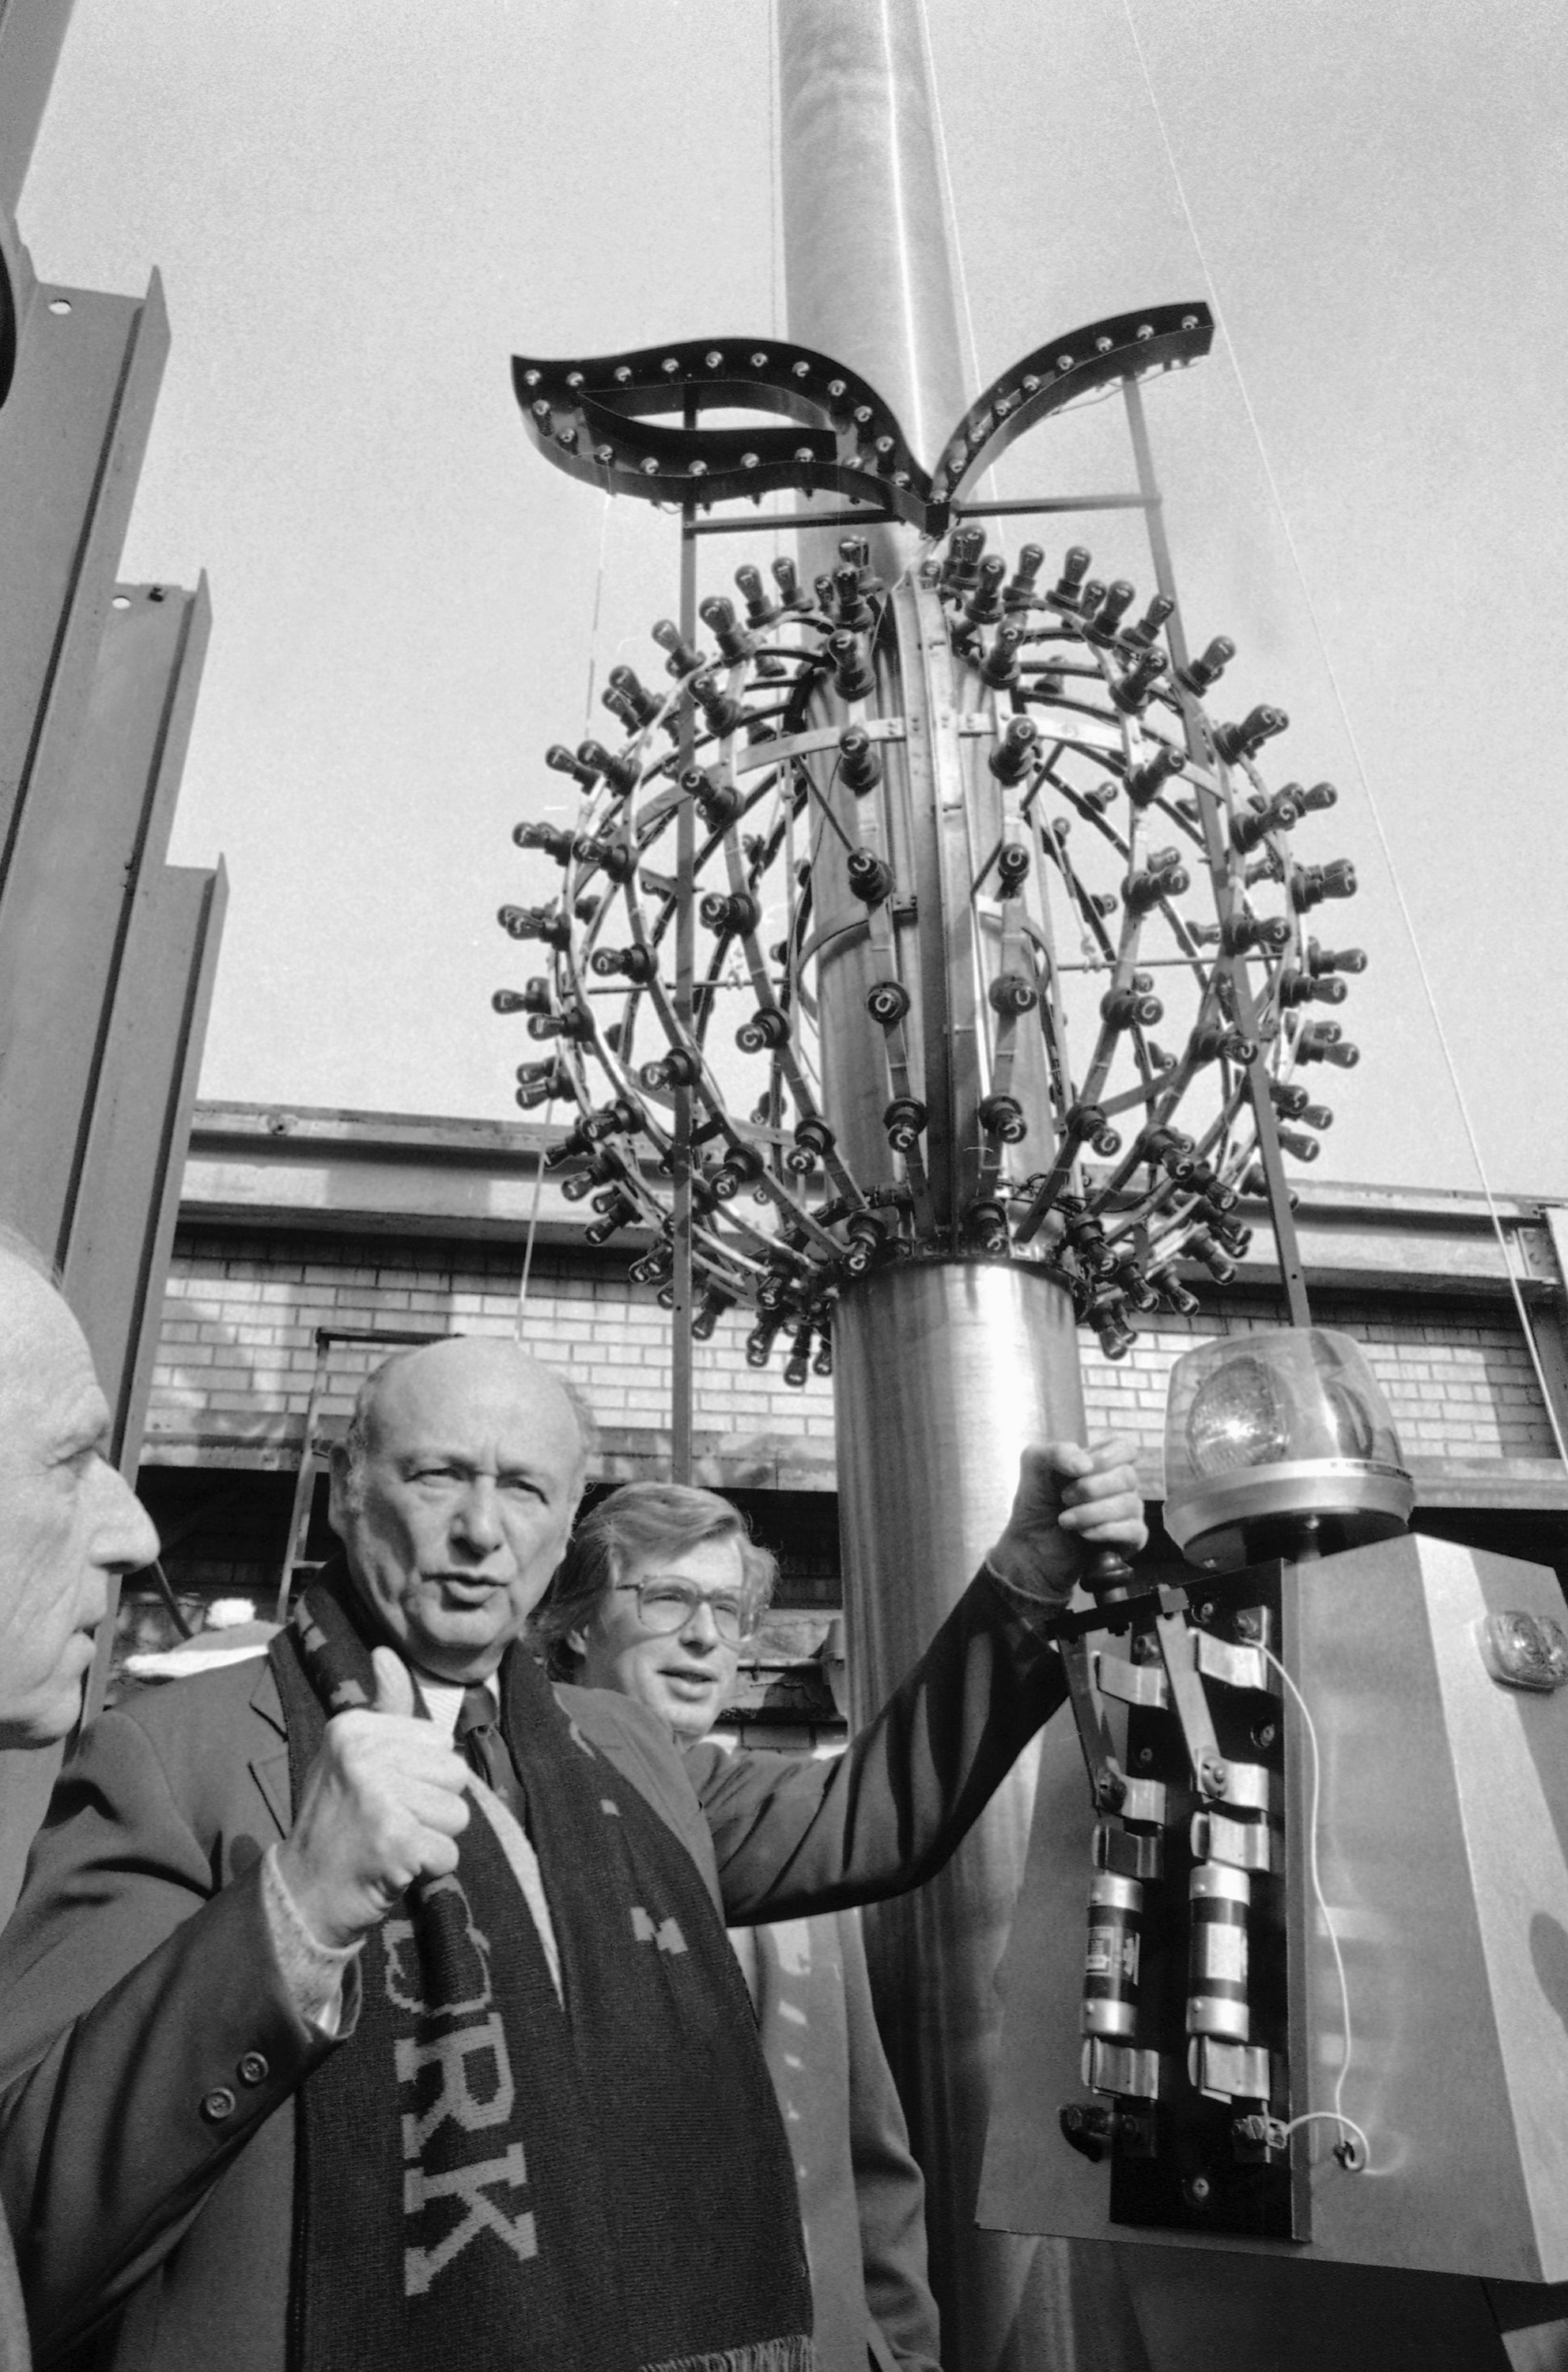 Mayor Ed Koch gives the thumbs up sign as he flips a switch to test the Big Apple Ball, Thursday, Dec. 24, 1981 in New York